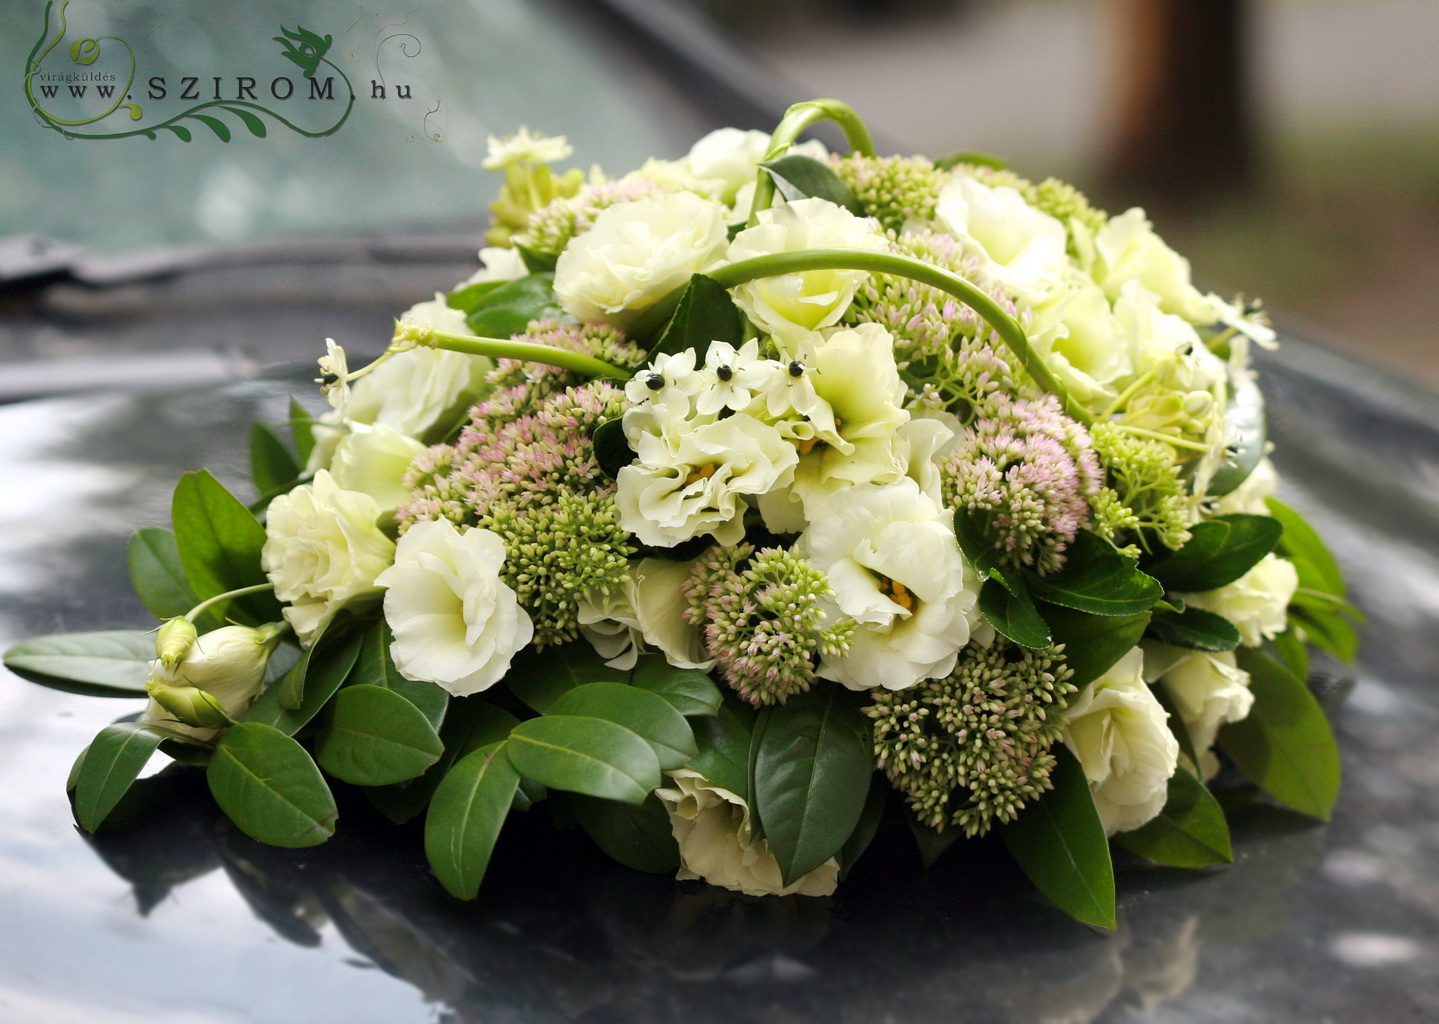 flower delivery Budapest - oval car flower arrangement with lisianthius and ornithogalums (green, cream, white)